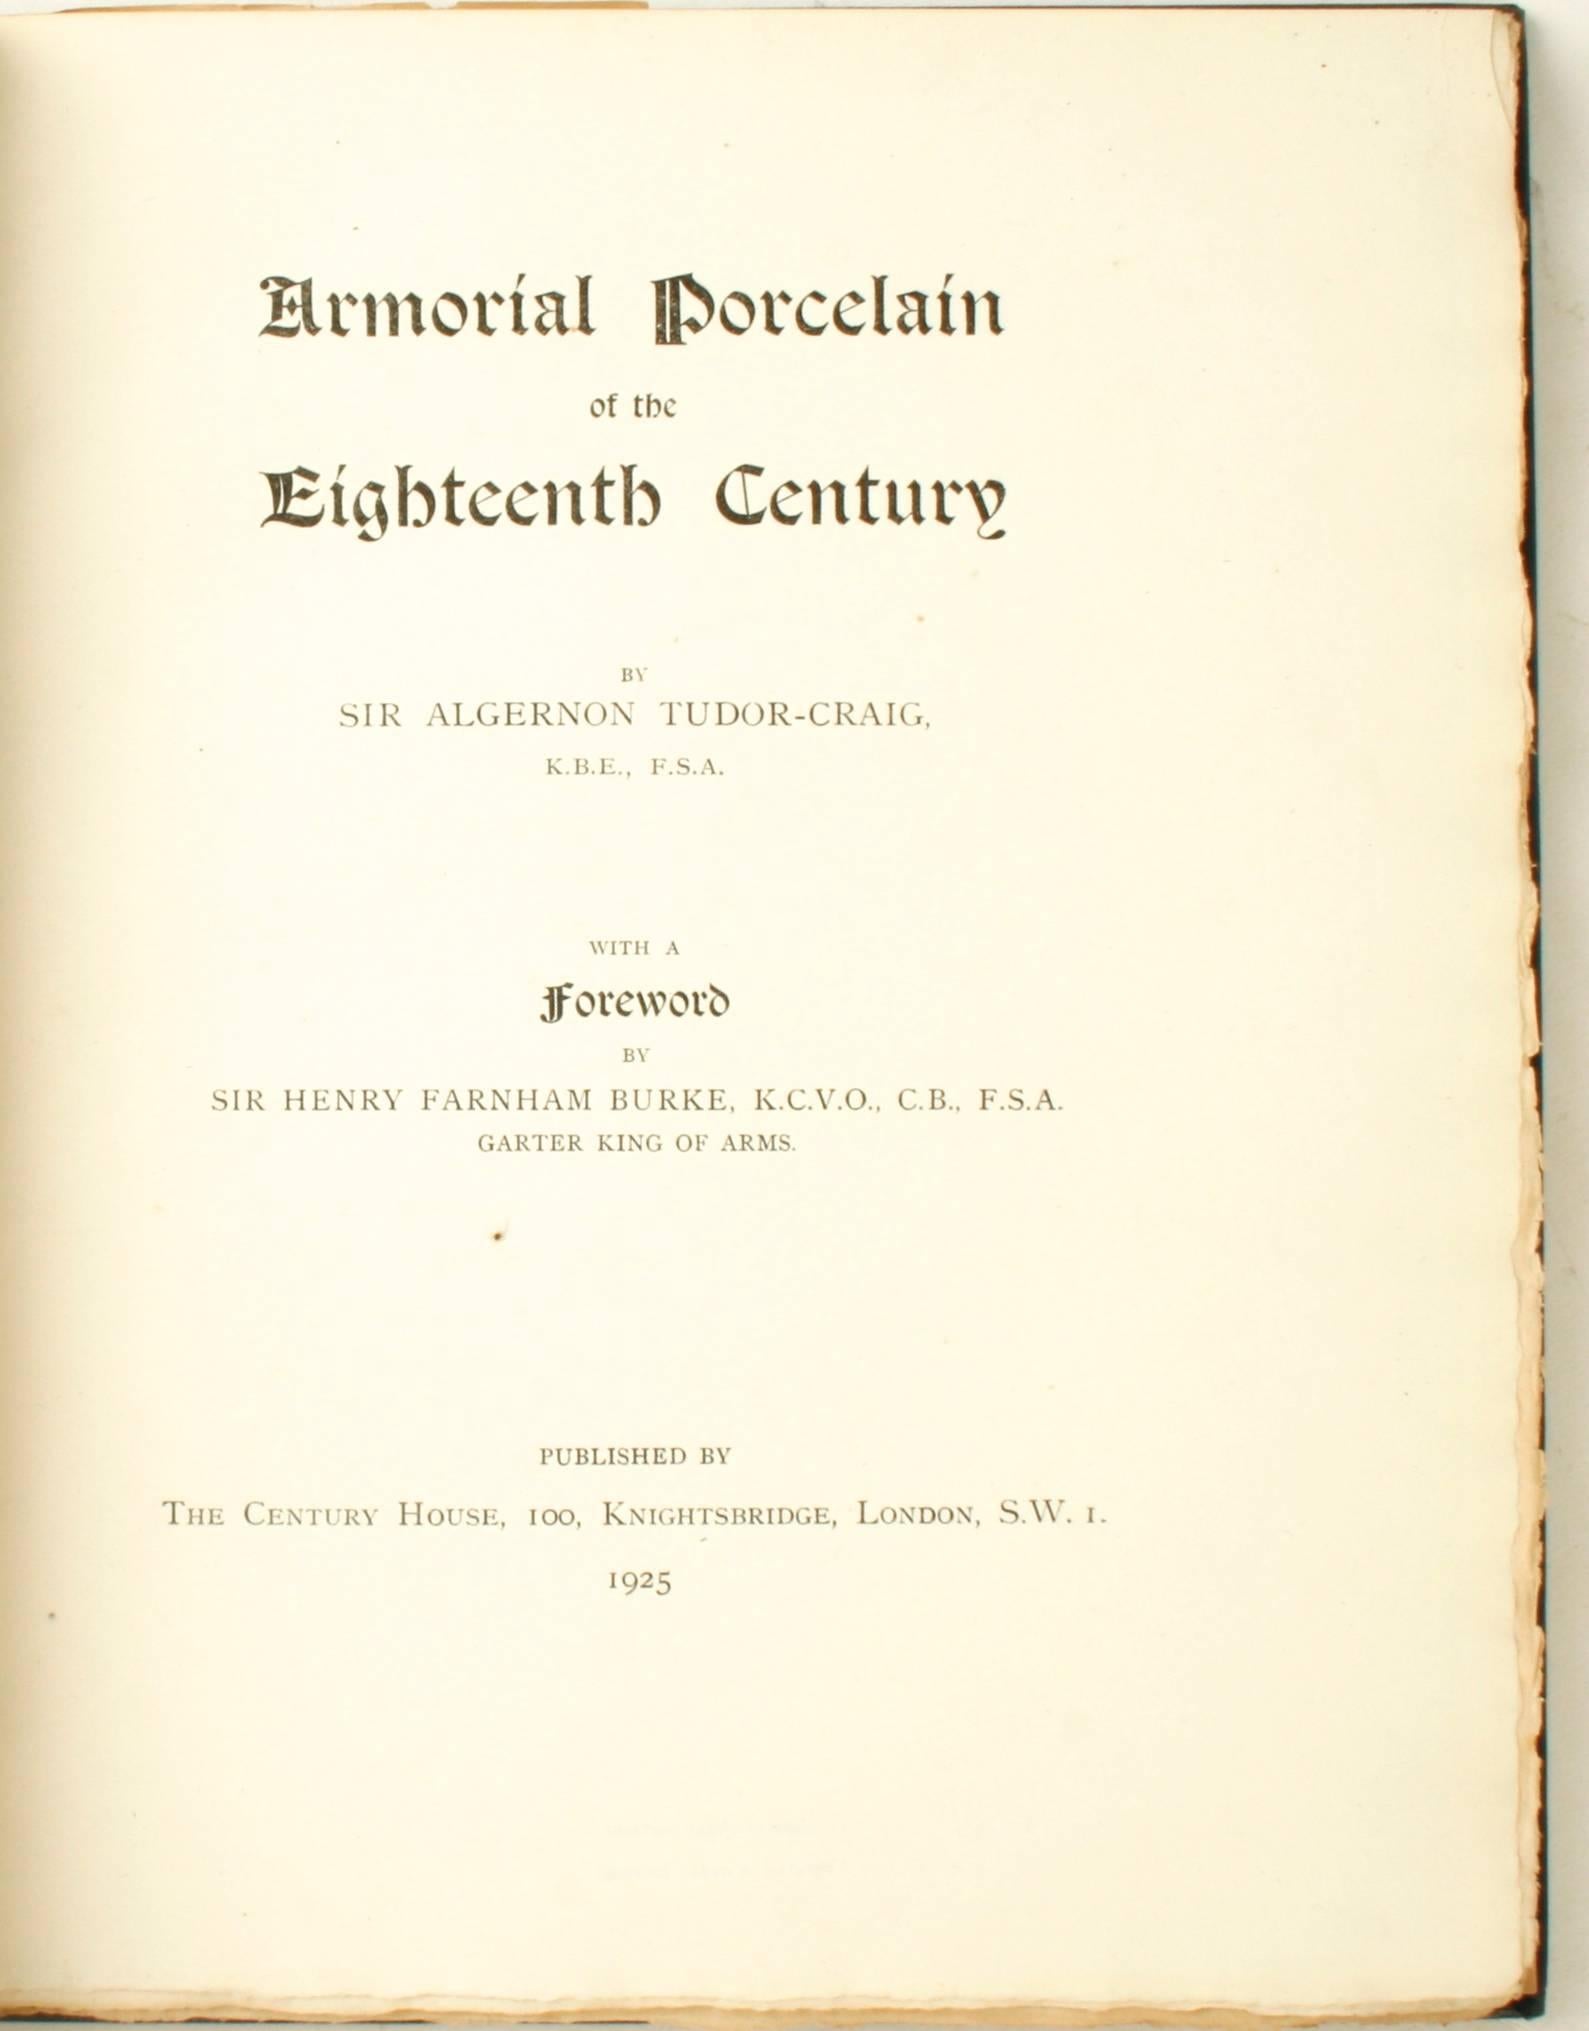 Armorial Porcelain of the Eighteenth Century by Sir Algernon Tudor-Craig. First Edition, signed by the author and numbered 950/1000, original gilt lettered dark blue cloth. Century House, London, 1925. Images in black and white, with three in full